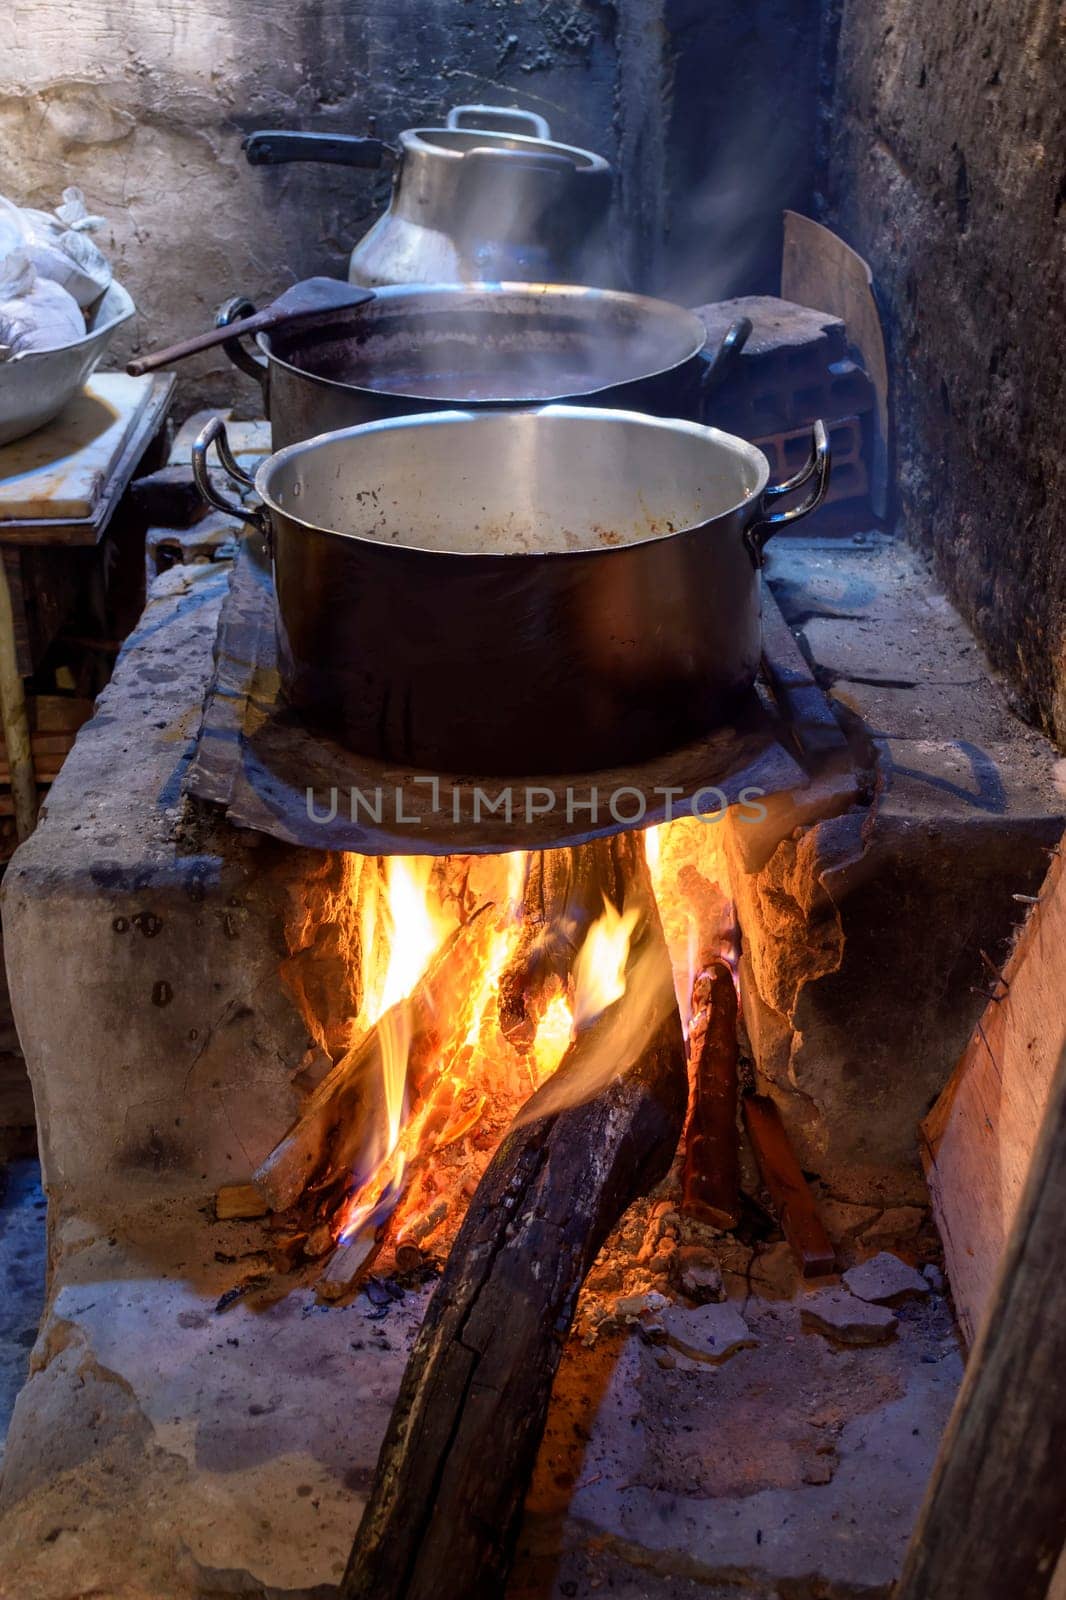 Traditional Brazilian food being prepared on old, dirty and popular wood stove